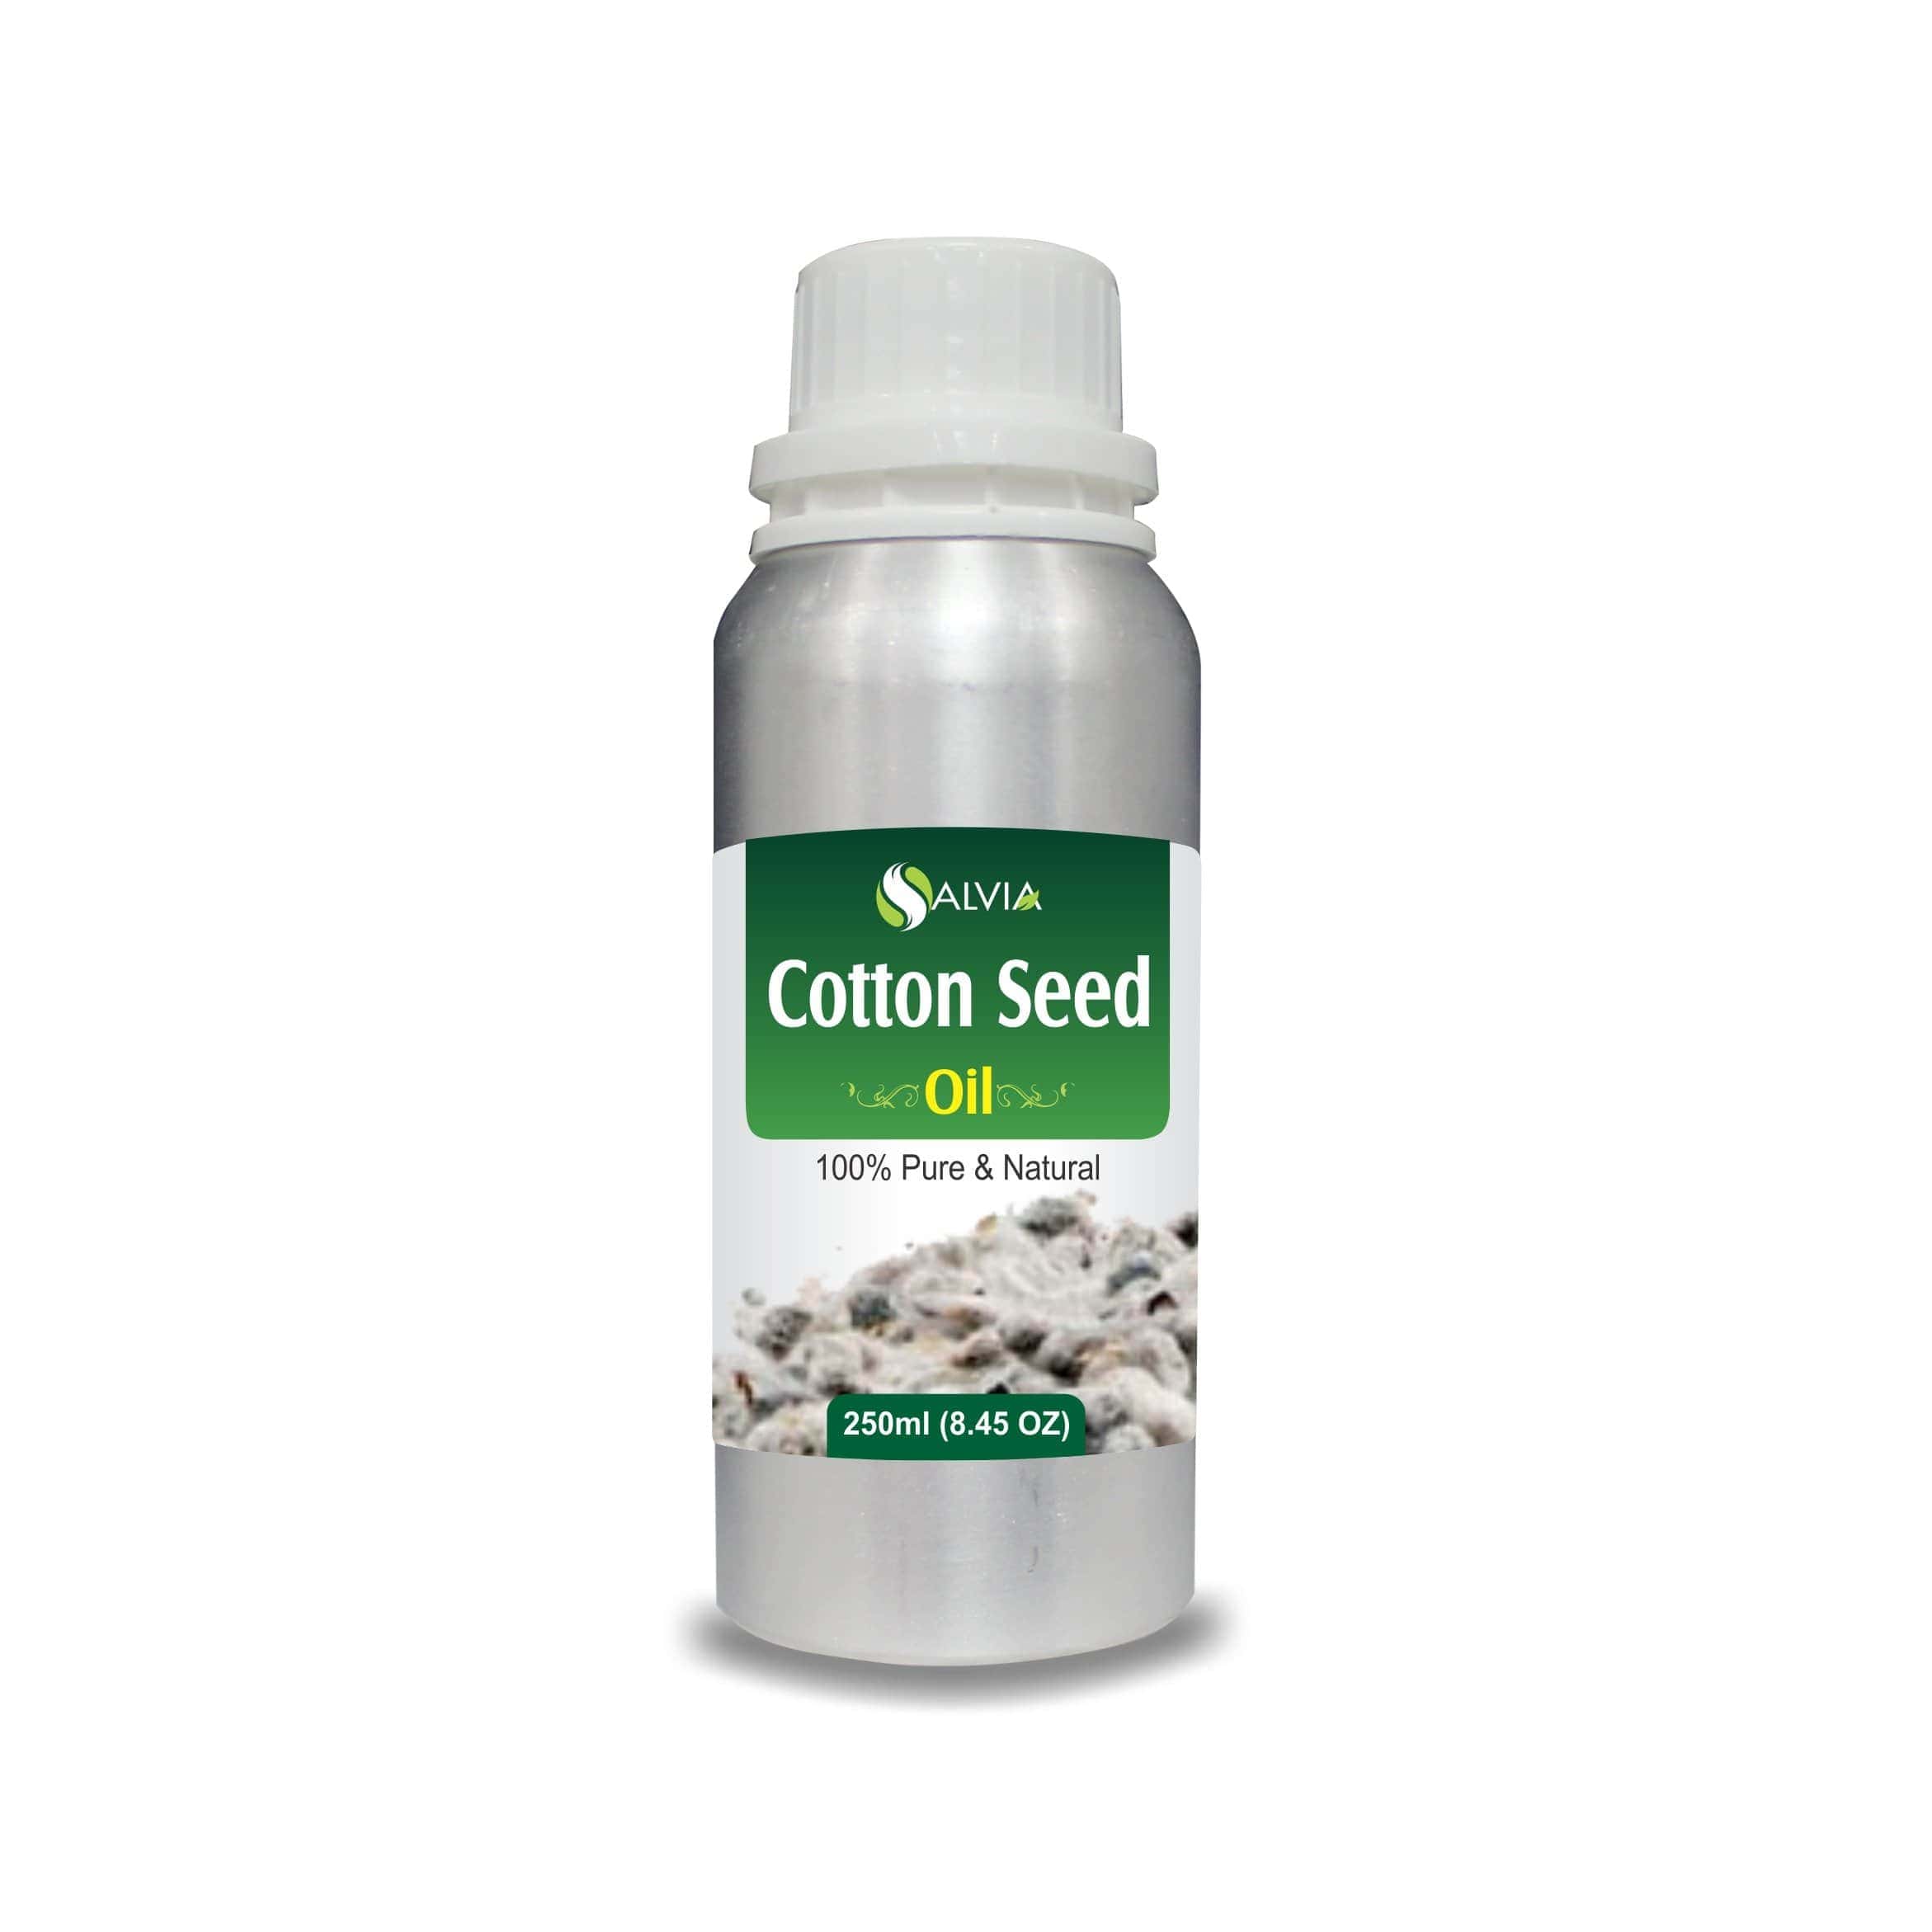 cotton seed oil price 5 litre